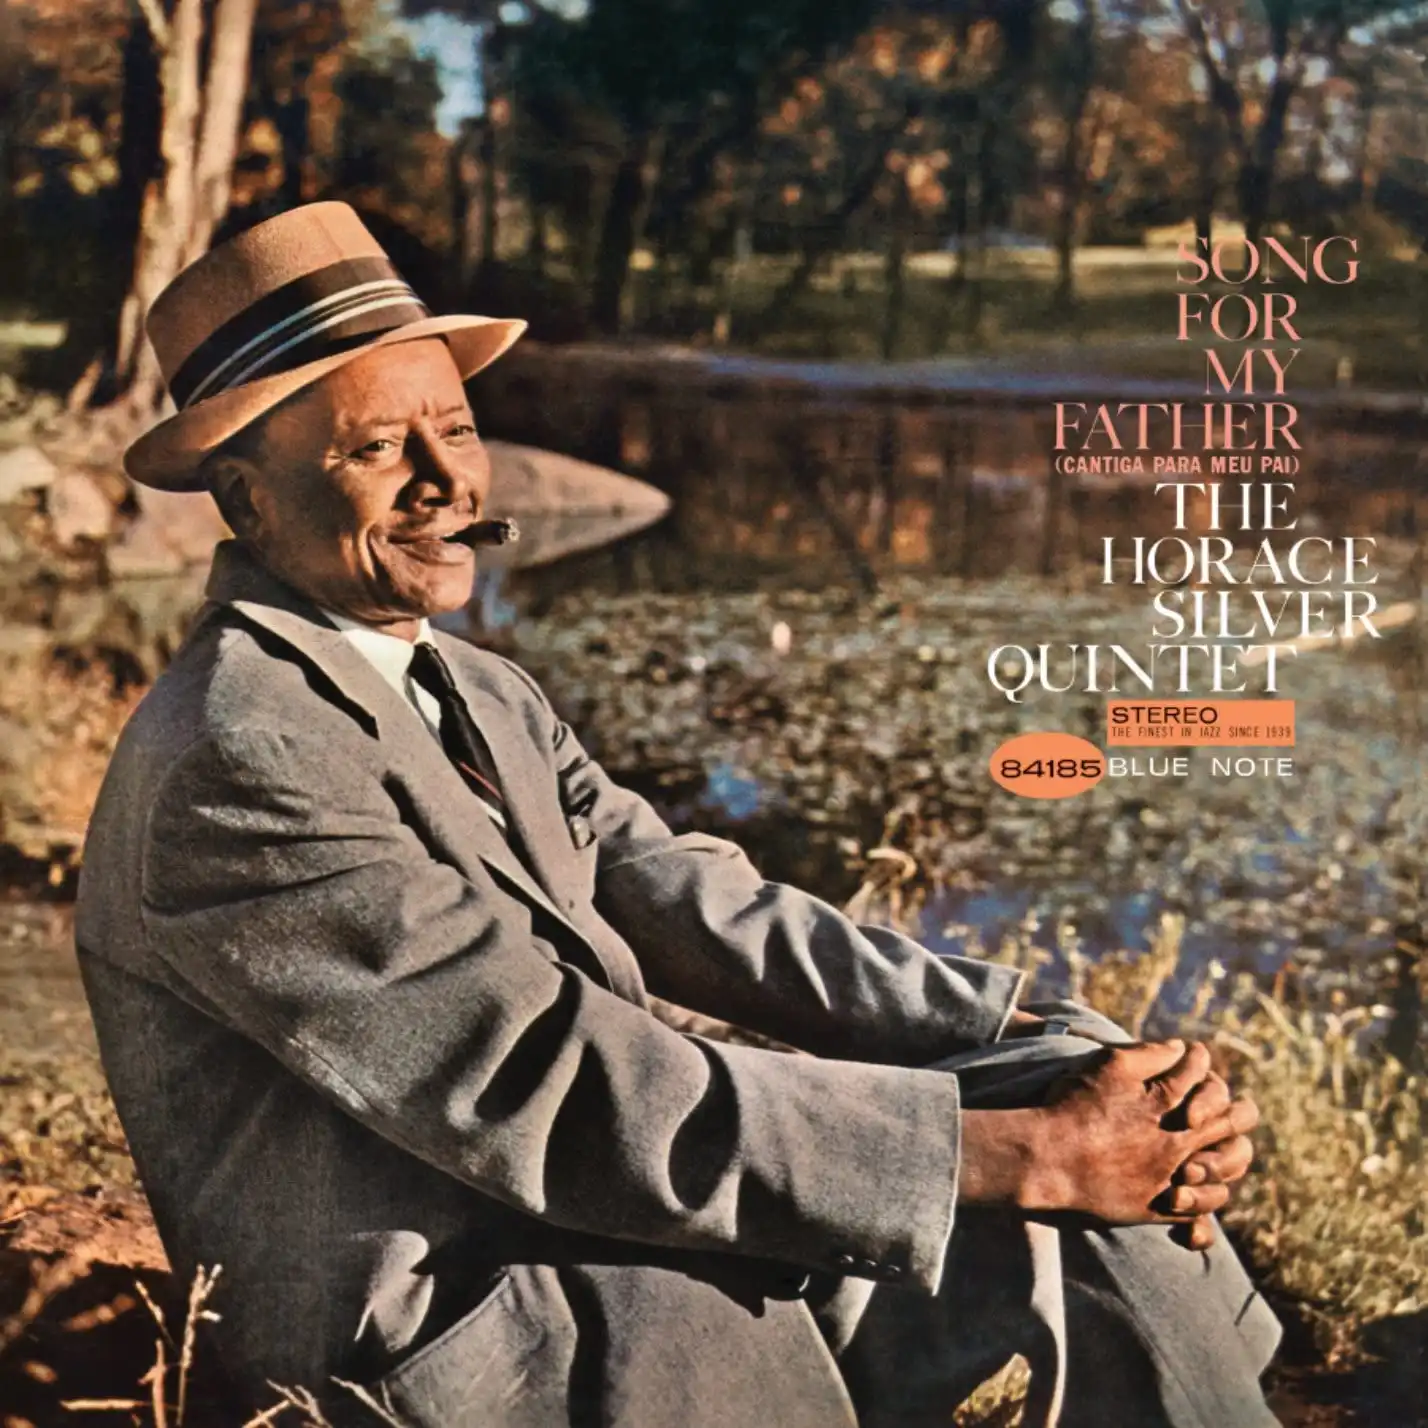 HORACE SILVER QUINTET / SONG FOR MY FATHER (1997 180g Reissue)